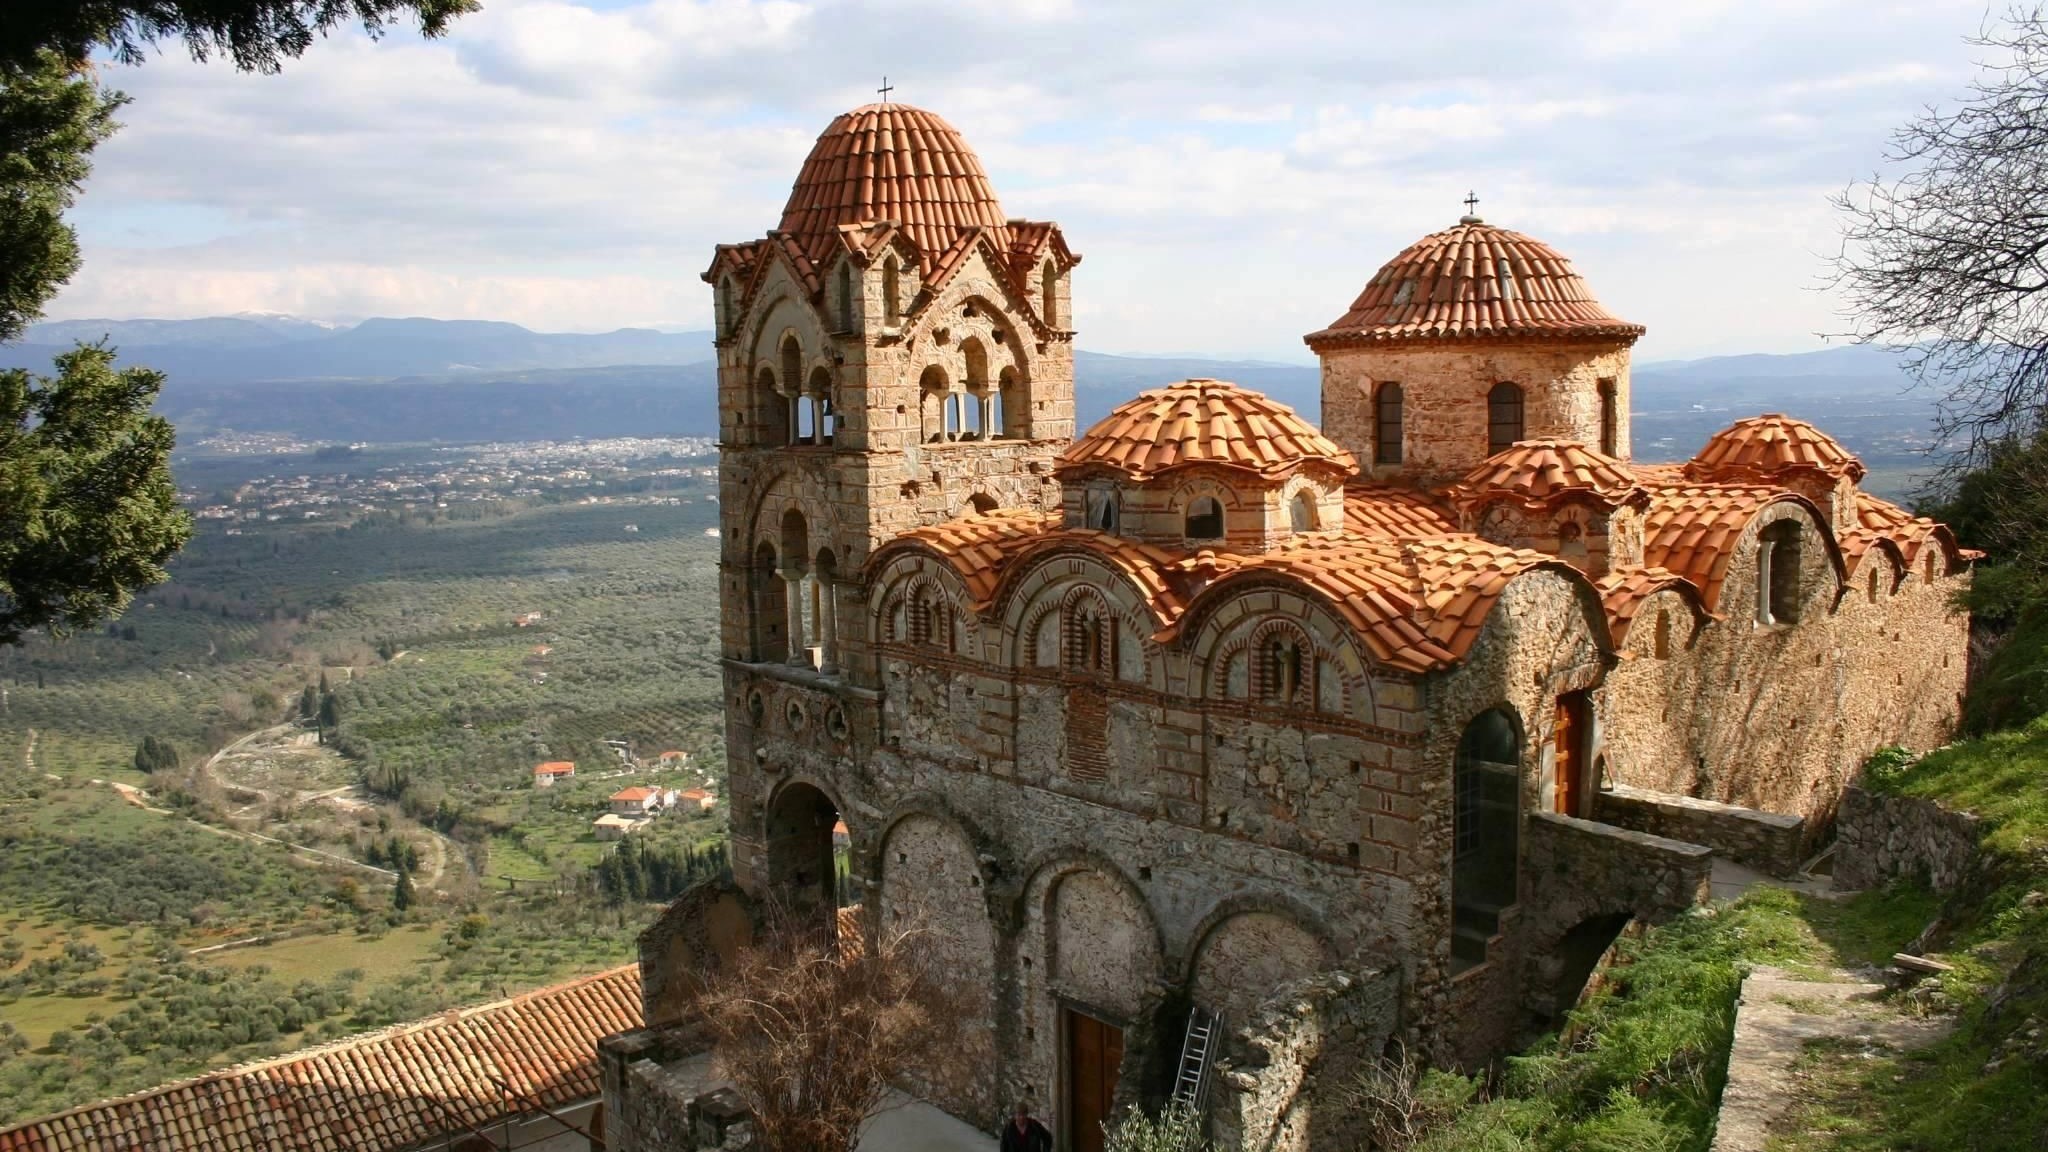 Mystras: The Legendary Byzantine Citadel in the Heart of the Peloponnese